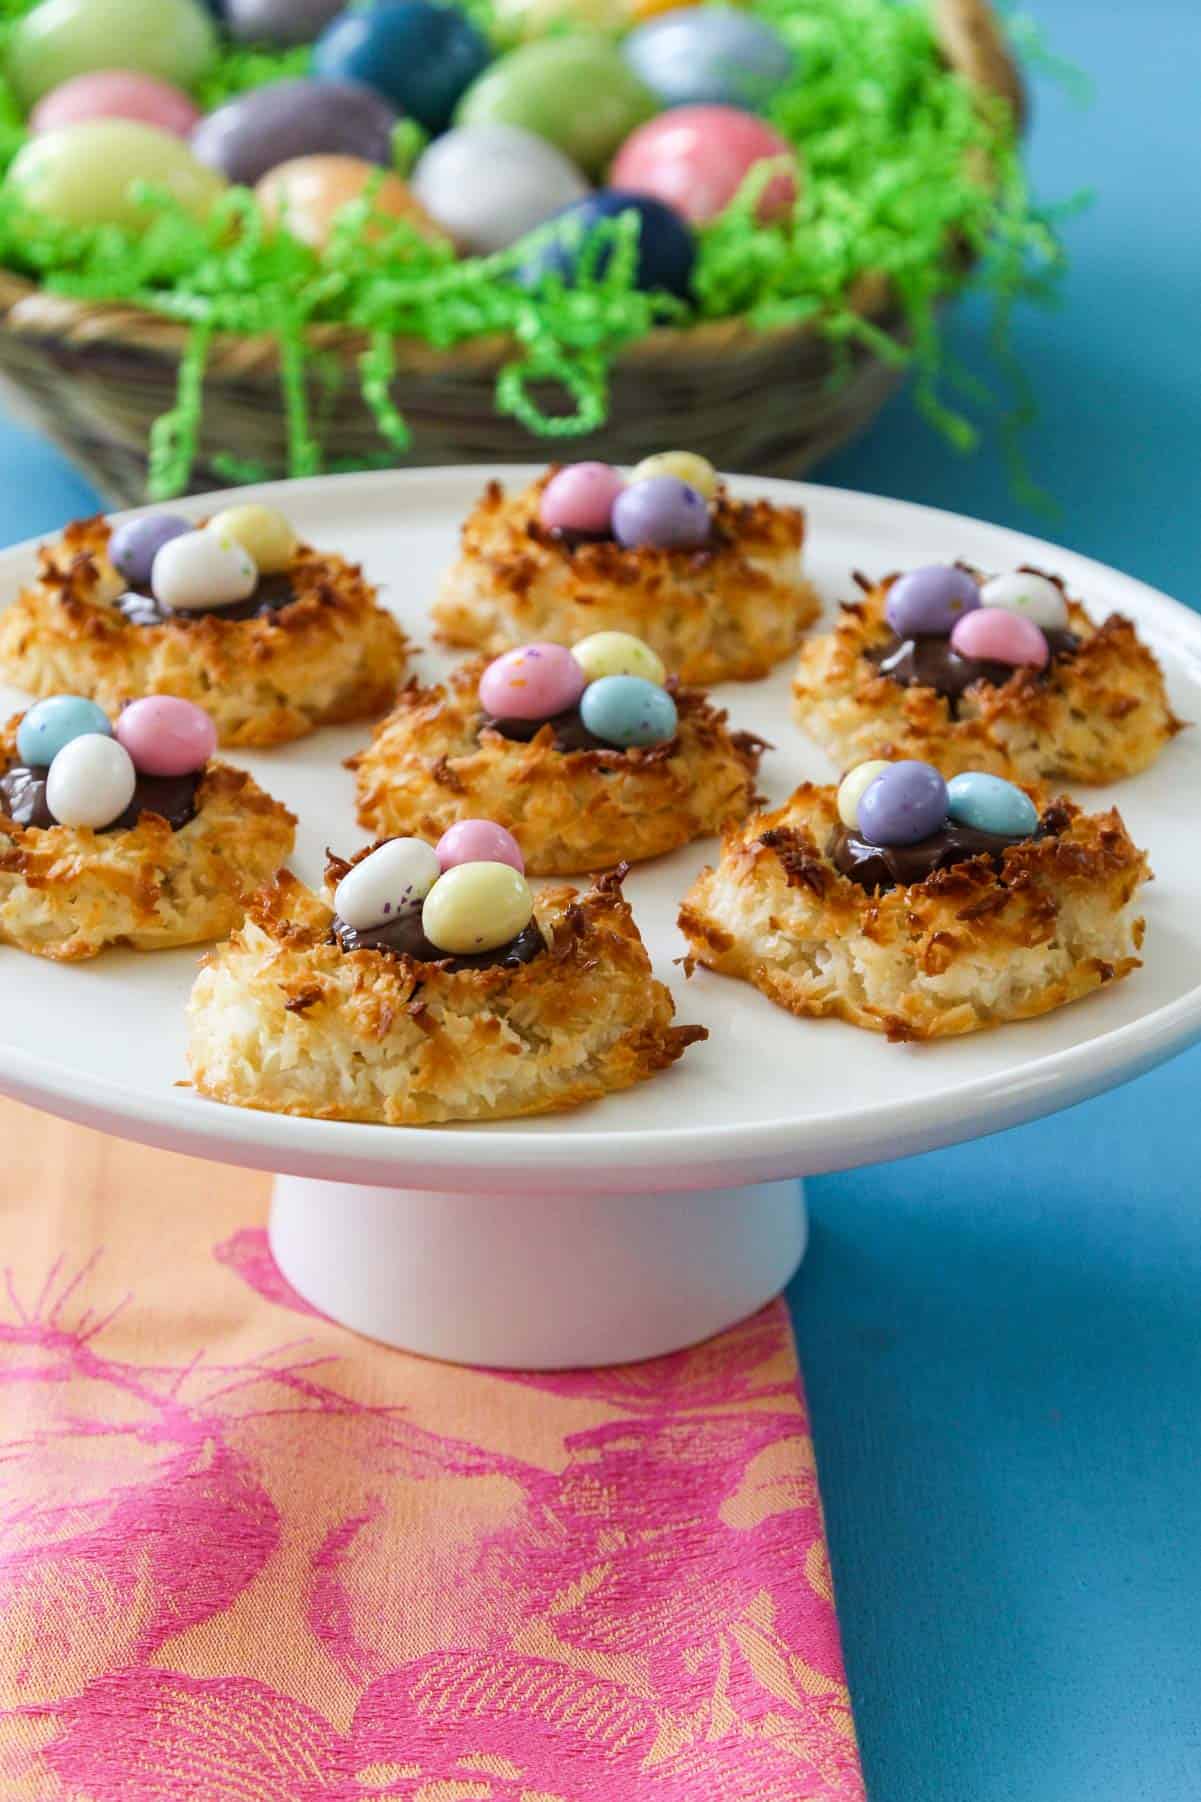 A great recipe for Easter dinner white cake plate with bird nest coconut marcaroons with candy eggs.